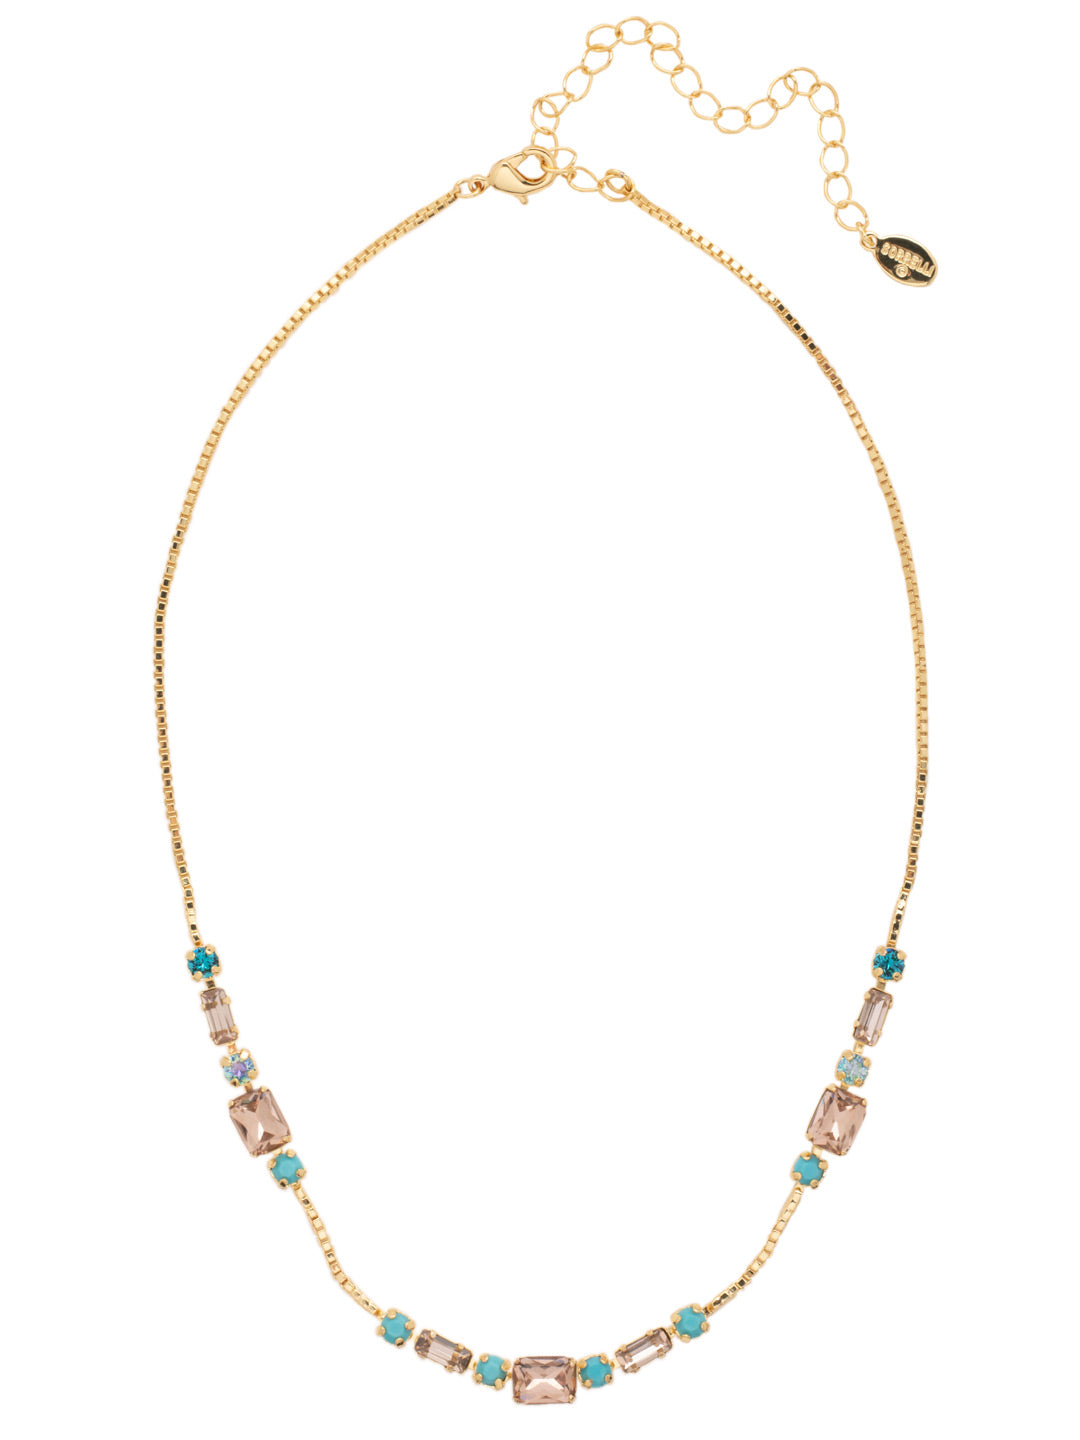 Emmy Tennis Necklace - NEY31BGSOP - <p>An assortment of crystals delicately line an adjustable chain with a lobster clasp closure. From Sorrelli's South Pacific collection in our Bright Gold-tone finish.</p>